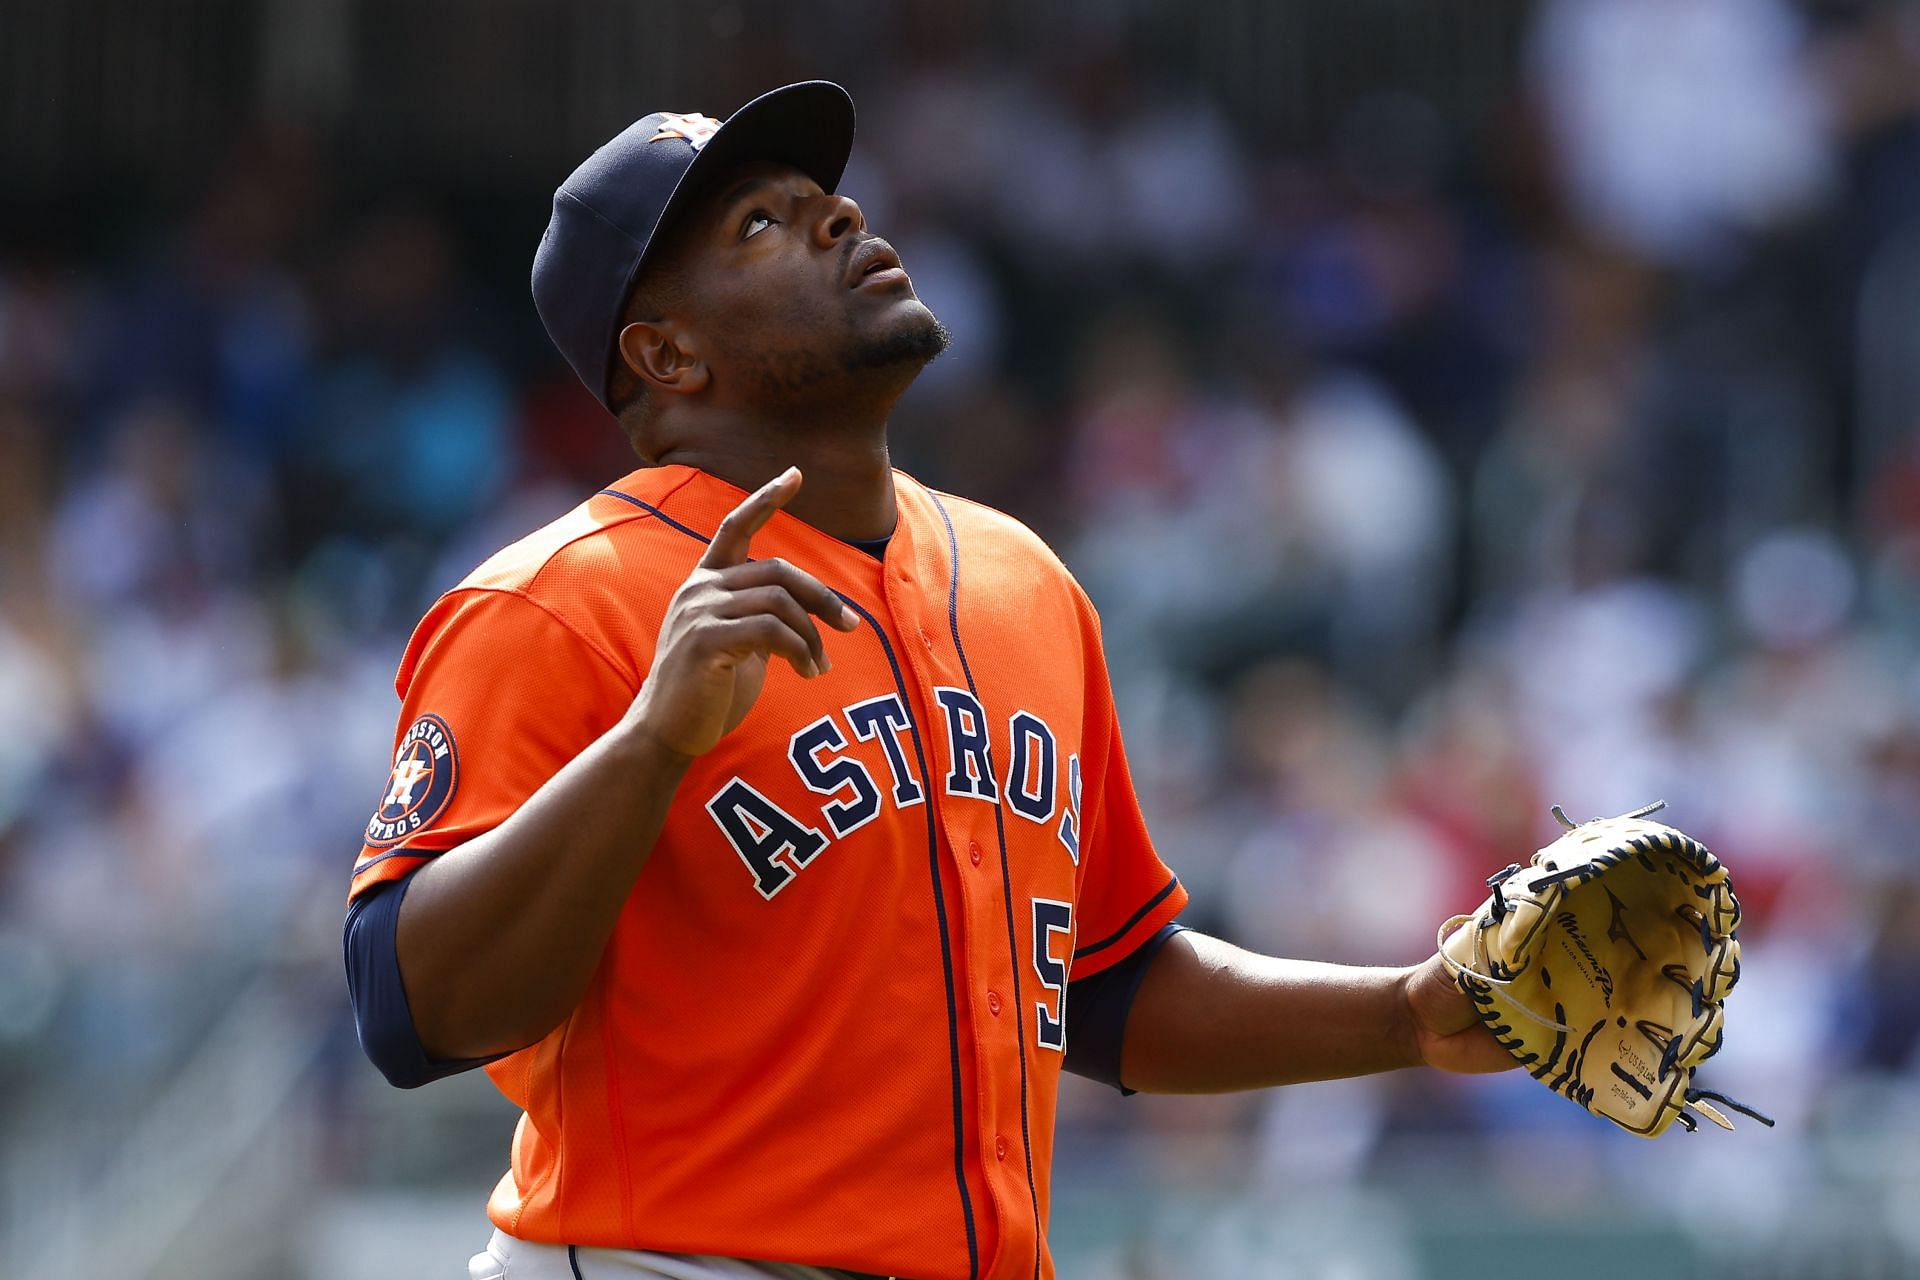 Hector Neris of the Houston Astros reacts during the eighth inning against the Atlanta Braves.